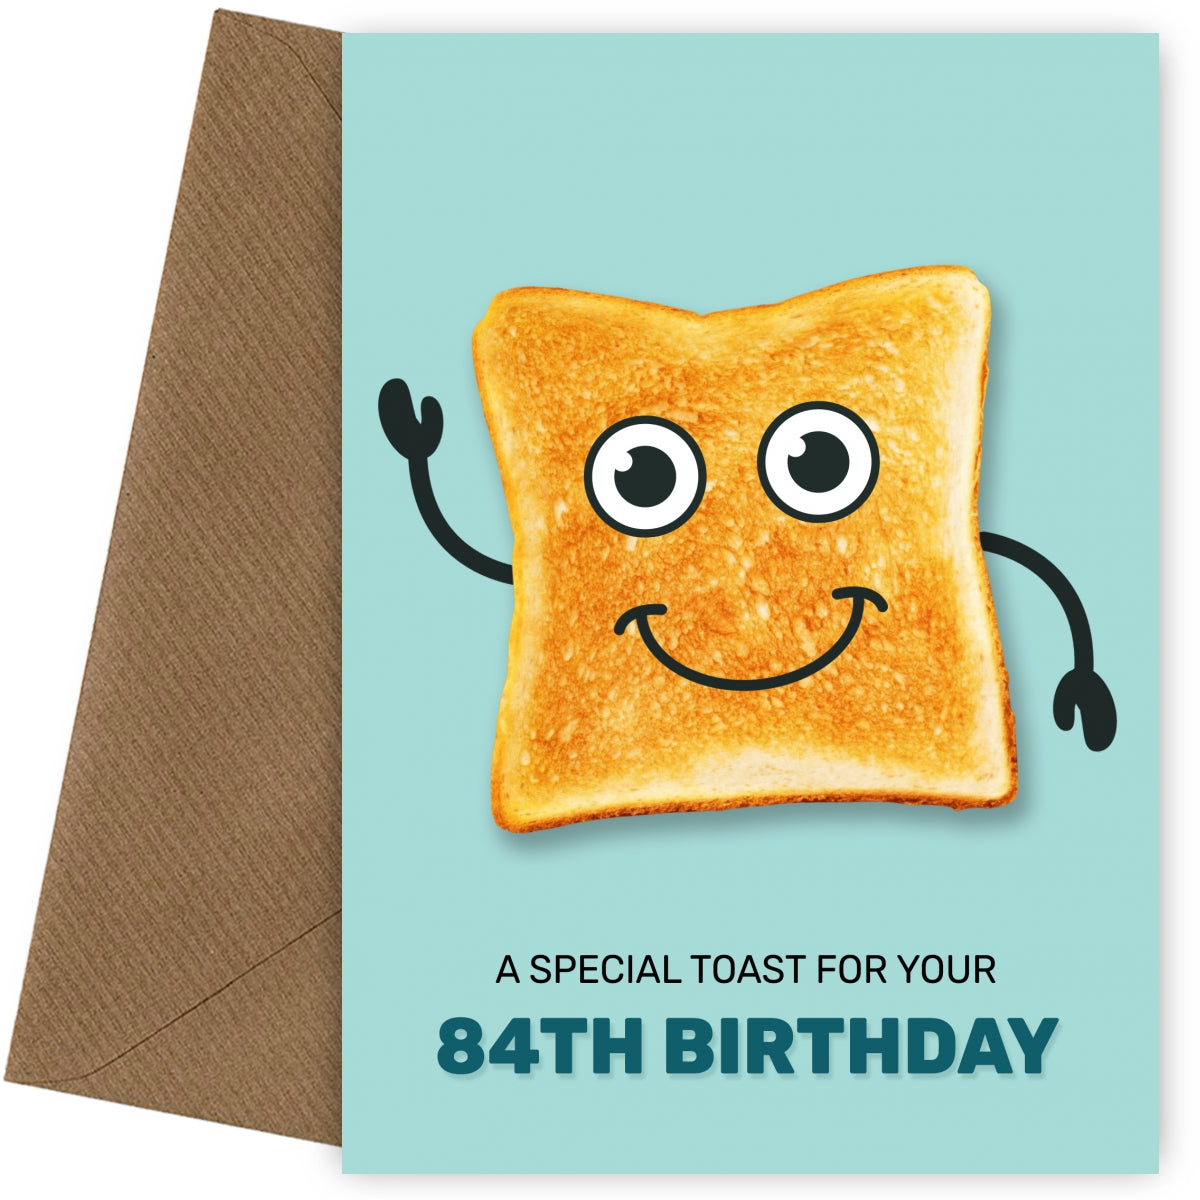 Funny 84th Birthday Card for Men and Women - Humorous Birthday Toast